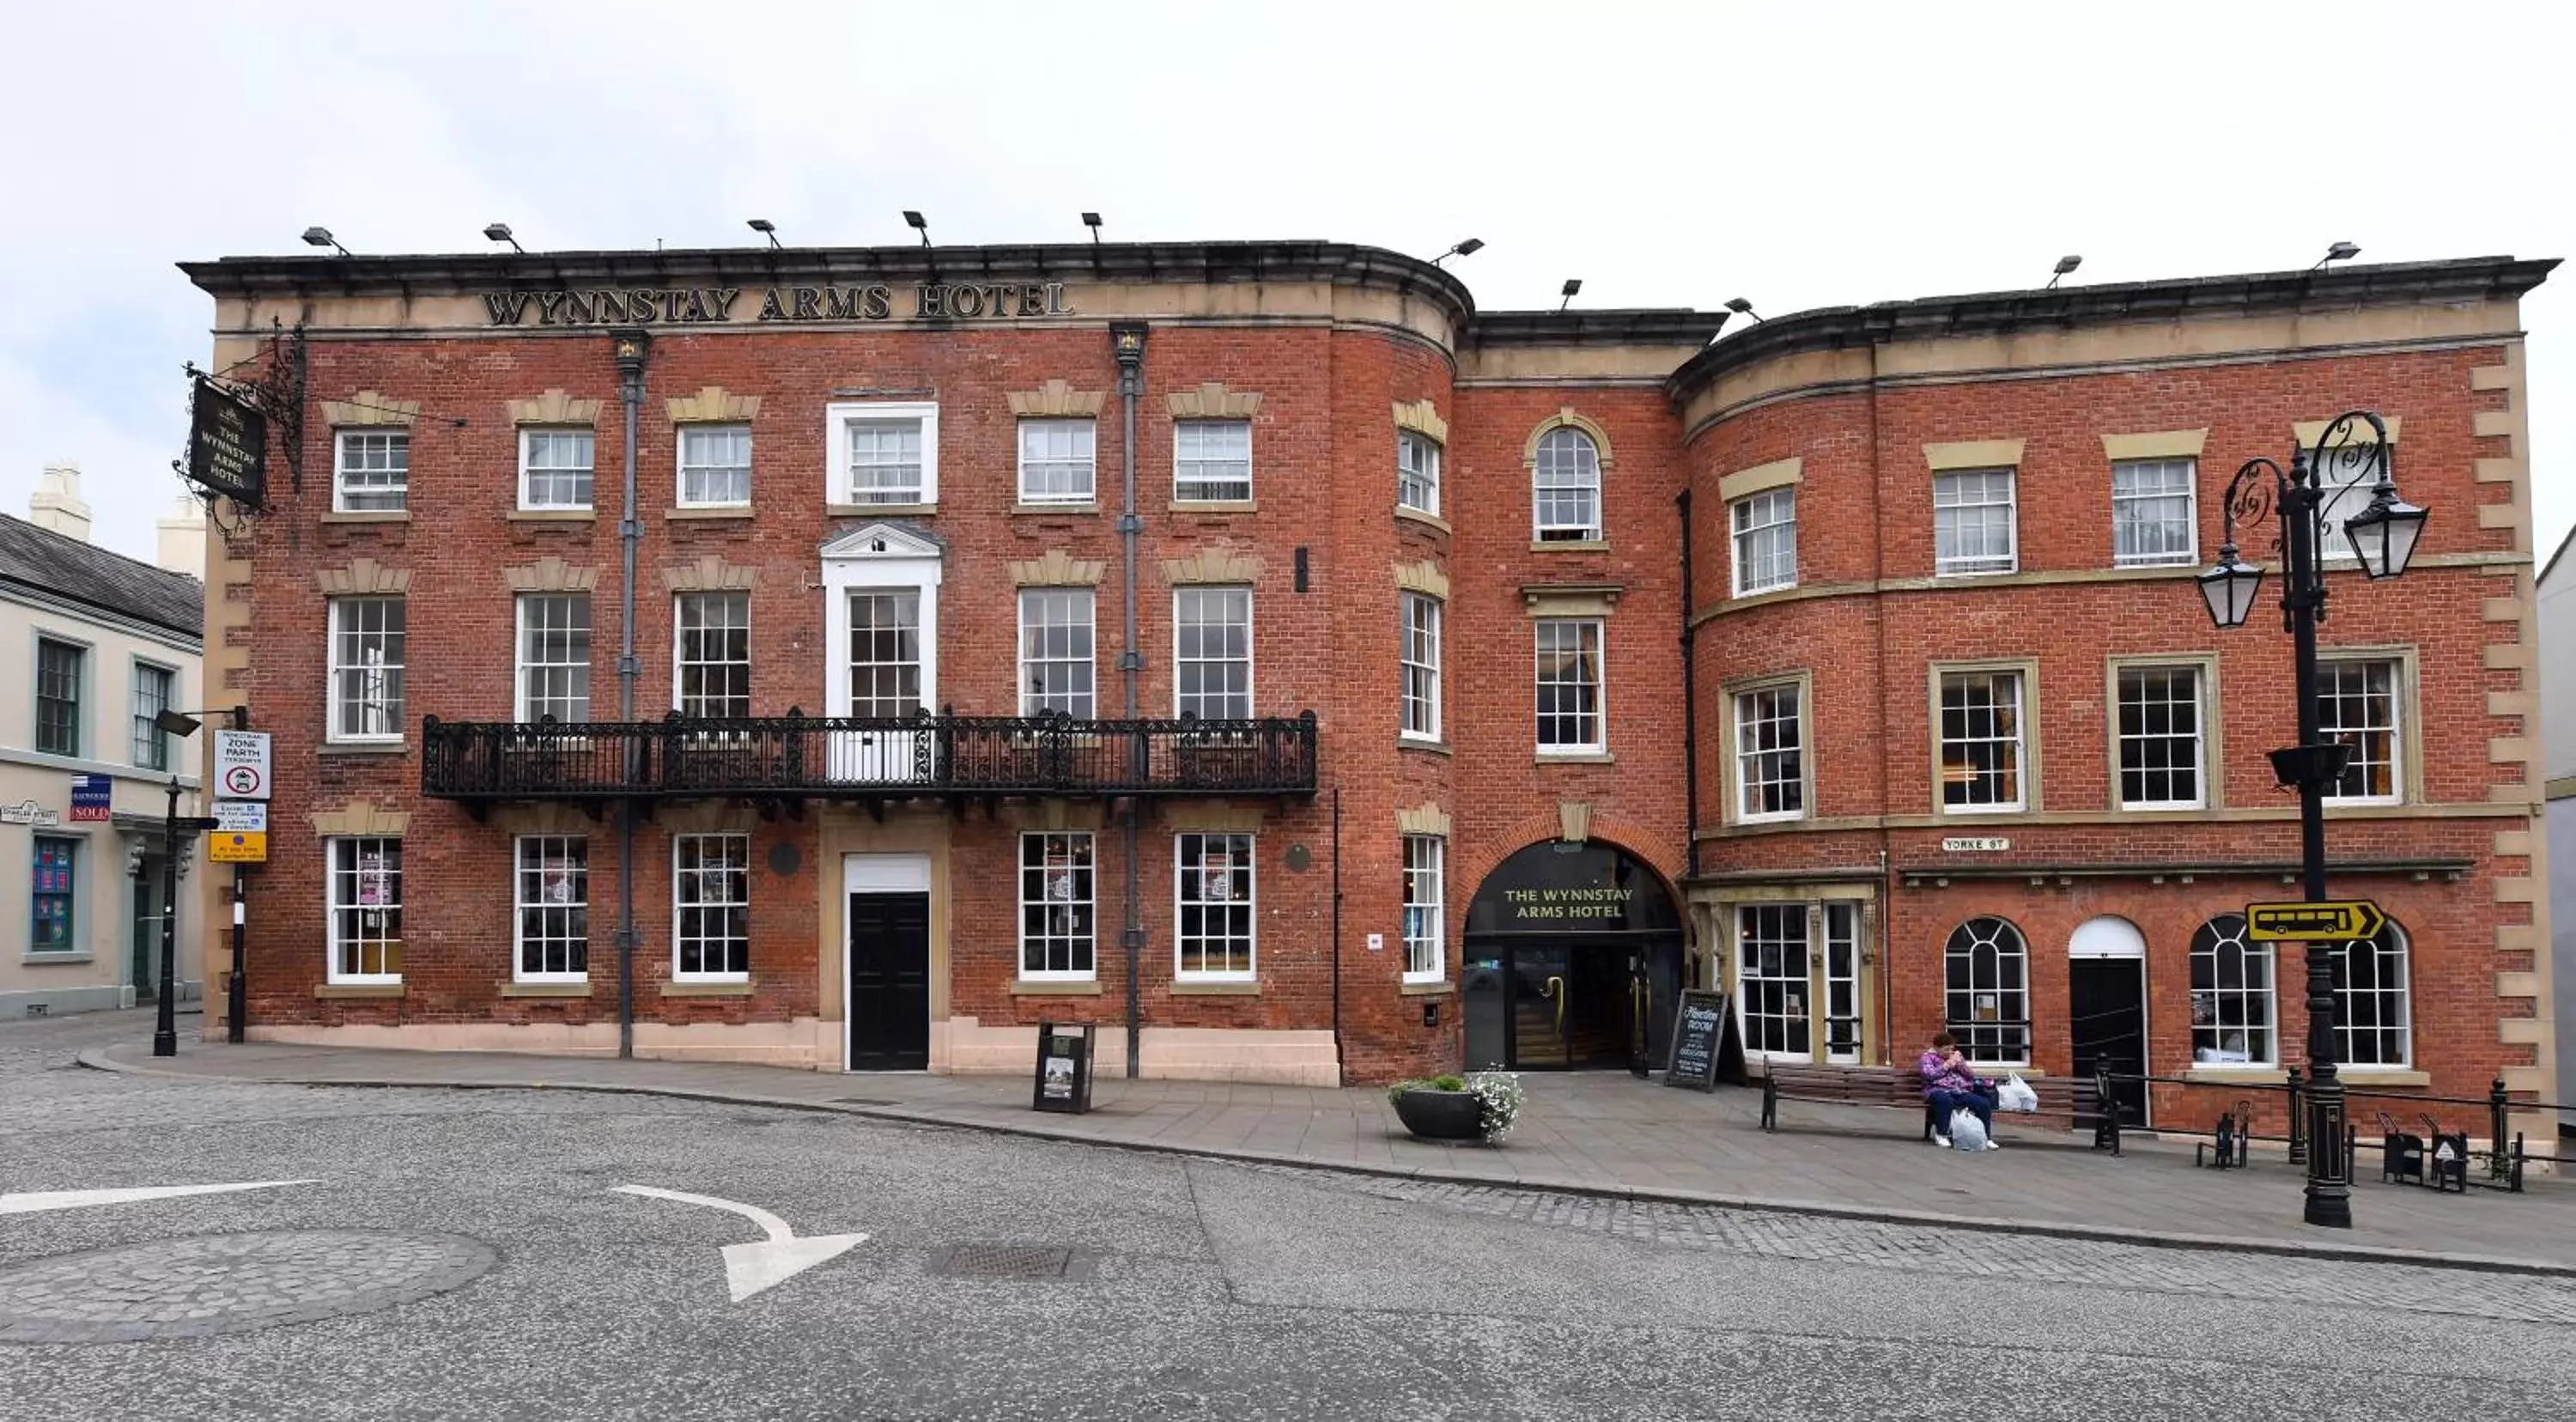 Property Building in Wynnstay Arms, Wrexham by Marston's Inns